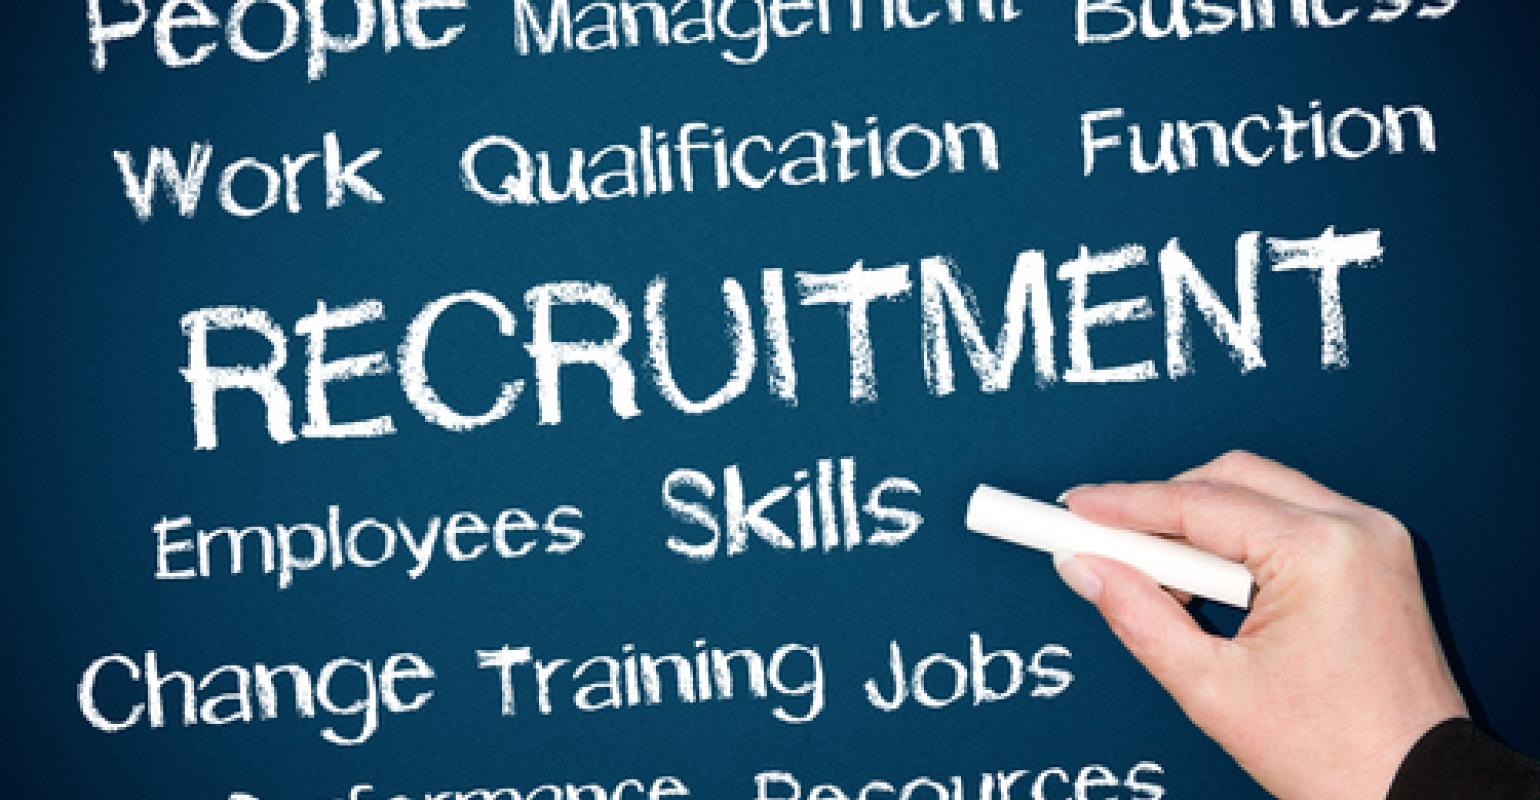 What Do Recruiters Look For In Candidates?